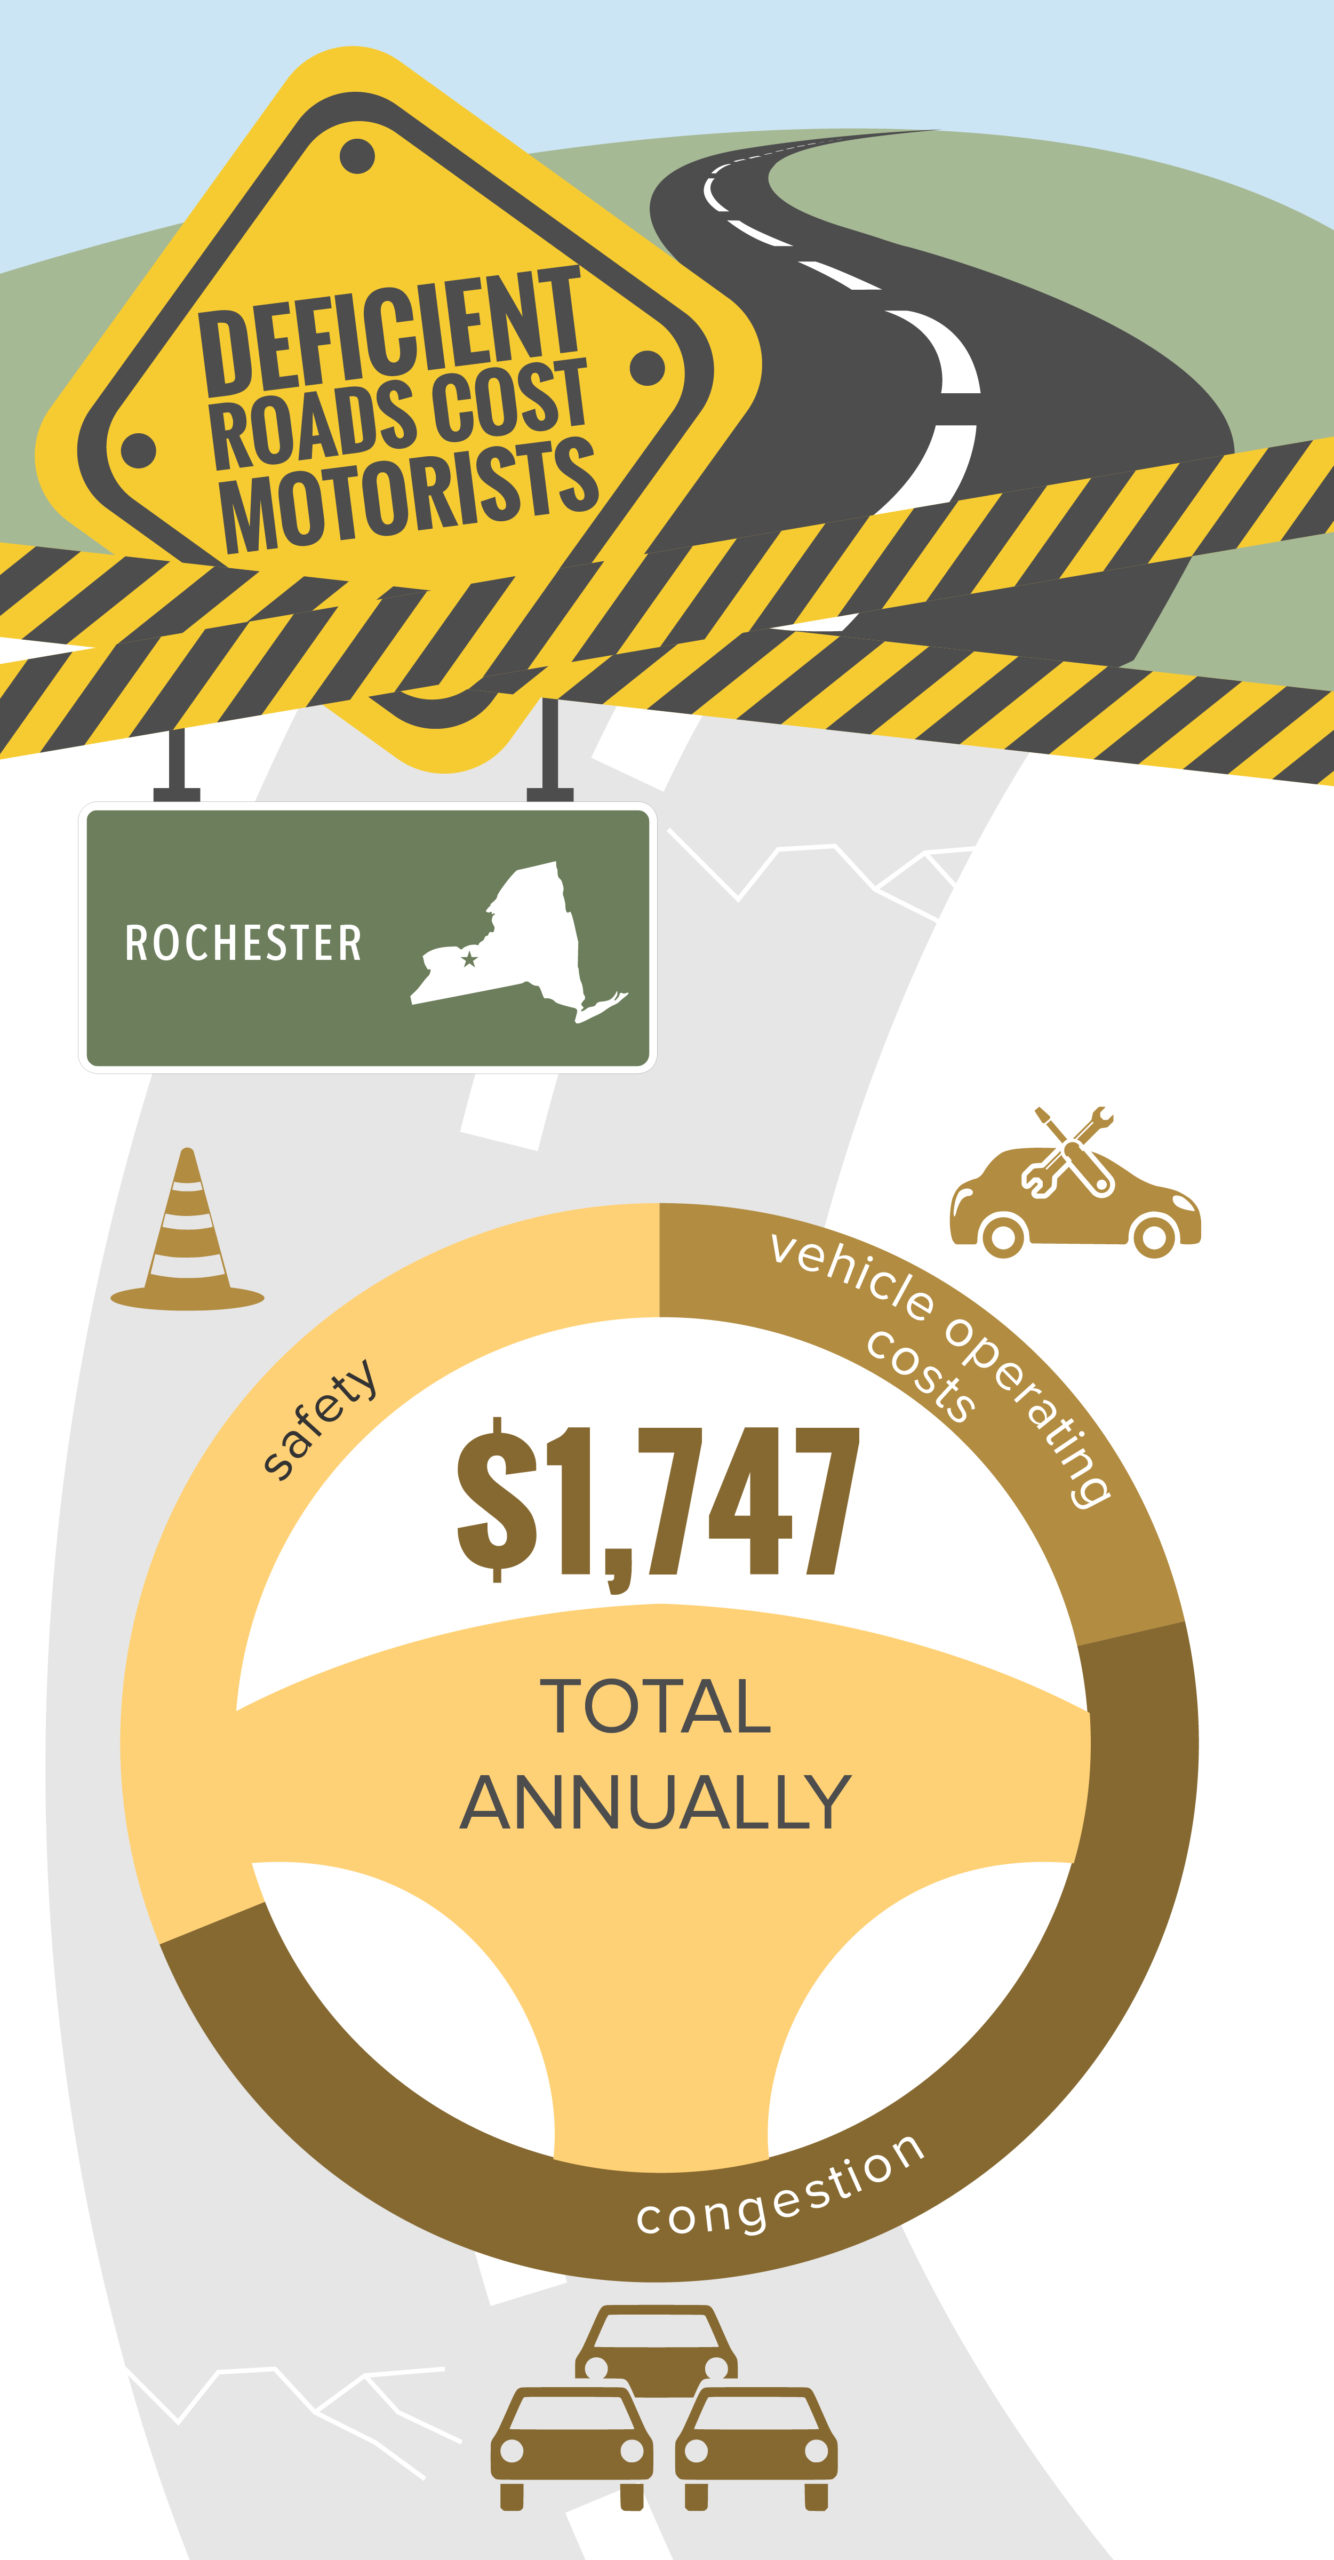 Rochester Deficient Roads Cost to Motorists Infographic – January 2022